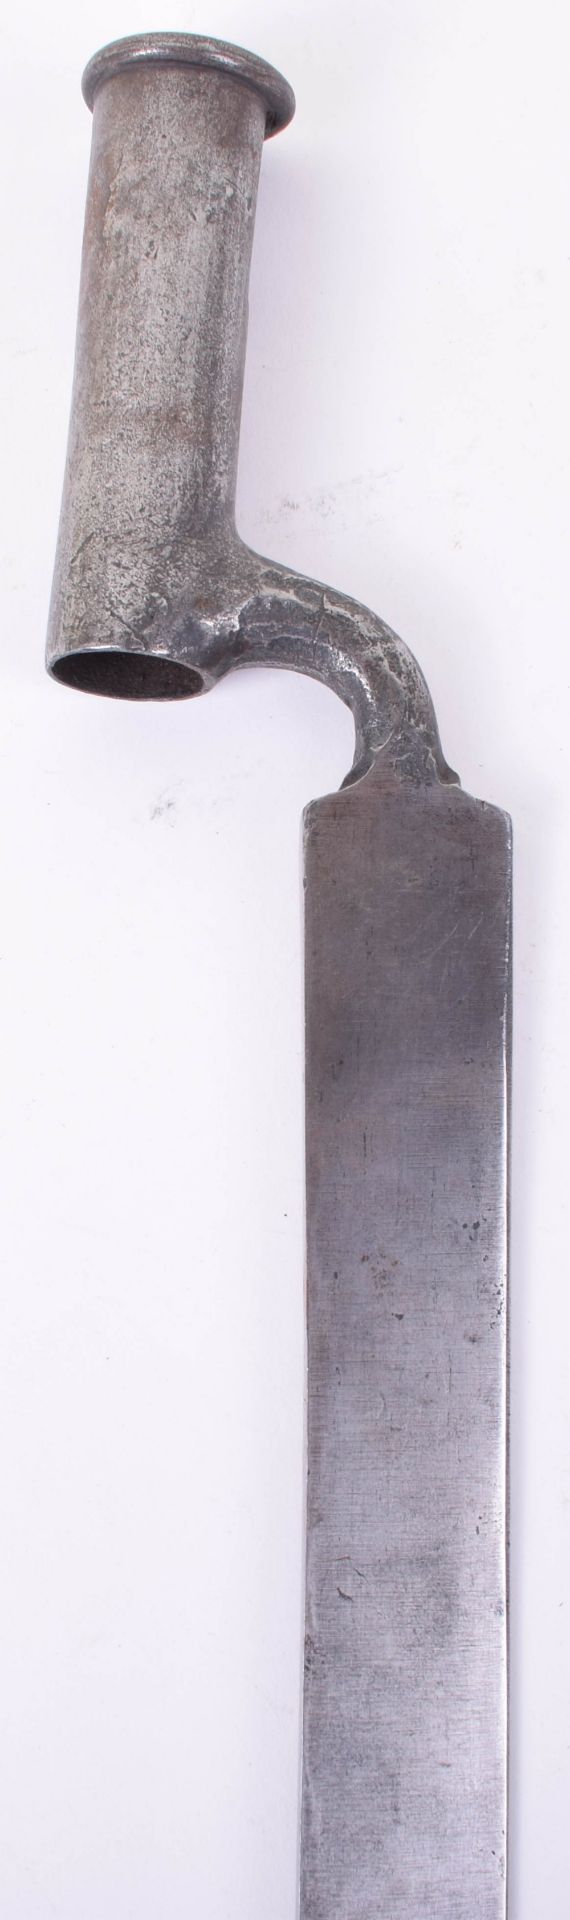 Indian Sappers & Miners Bayonet - Image 2 of 6